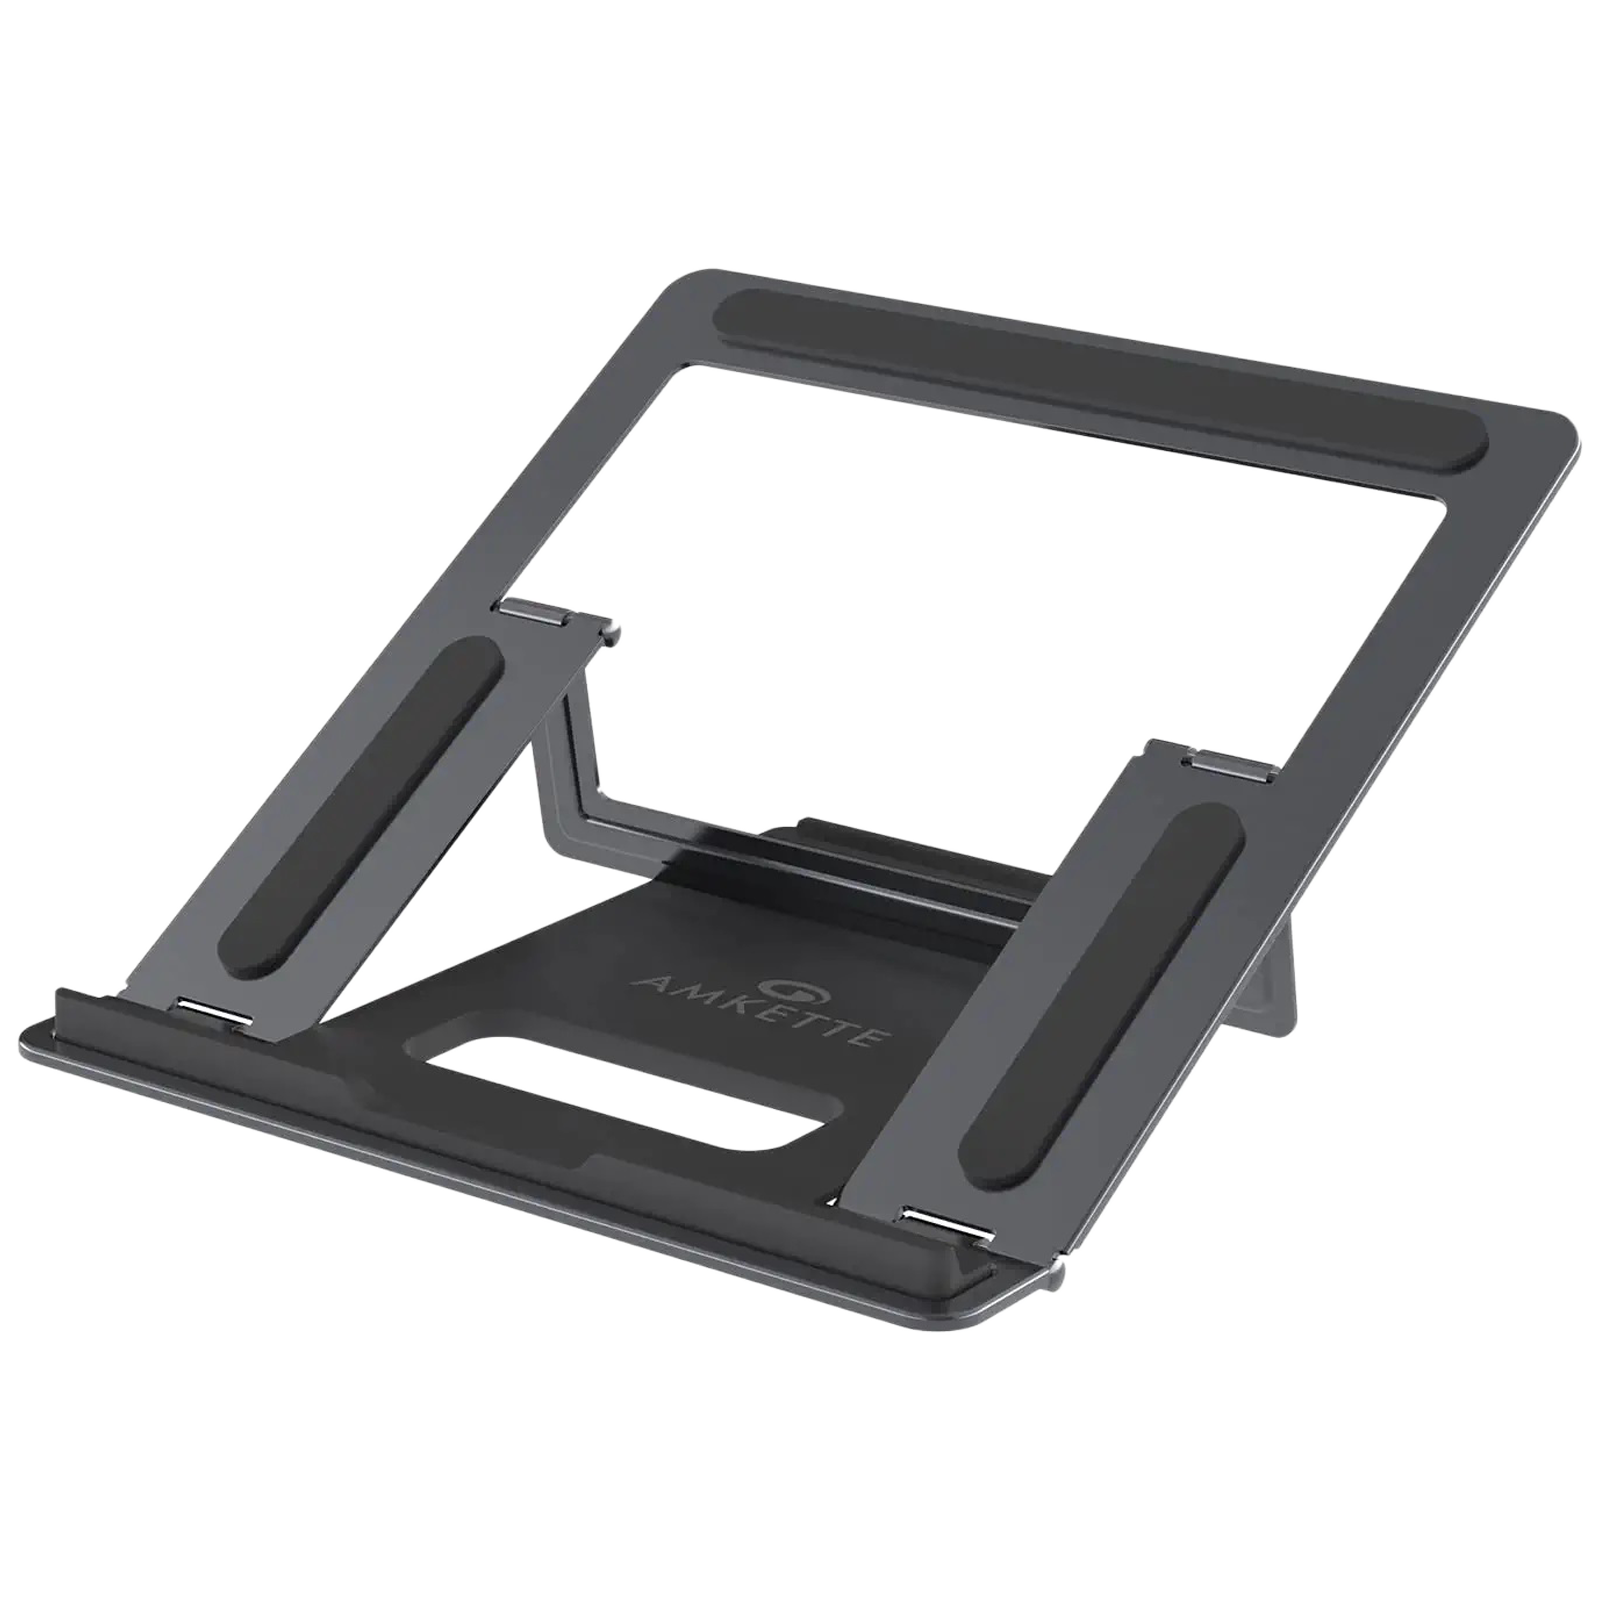 Amkette Ergo Luxe Laptop Stand (4 Level Adjustment, Space Grey)